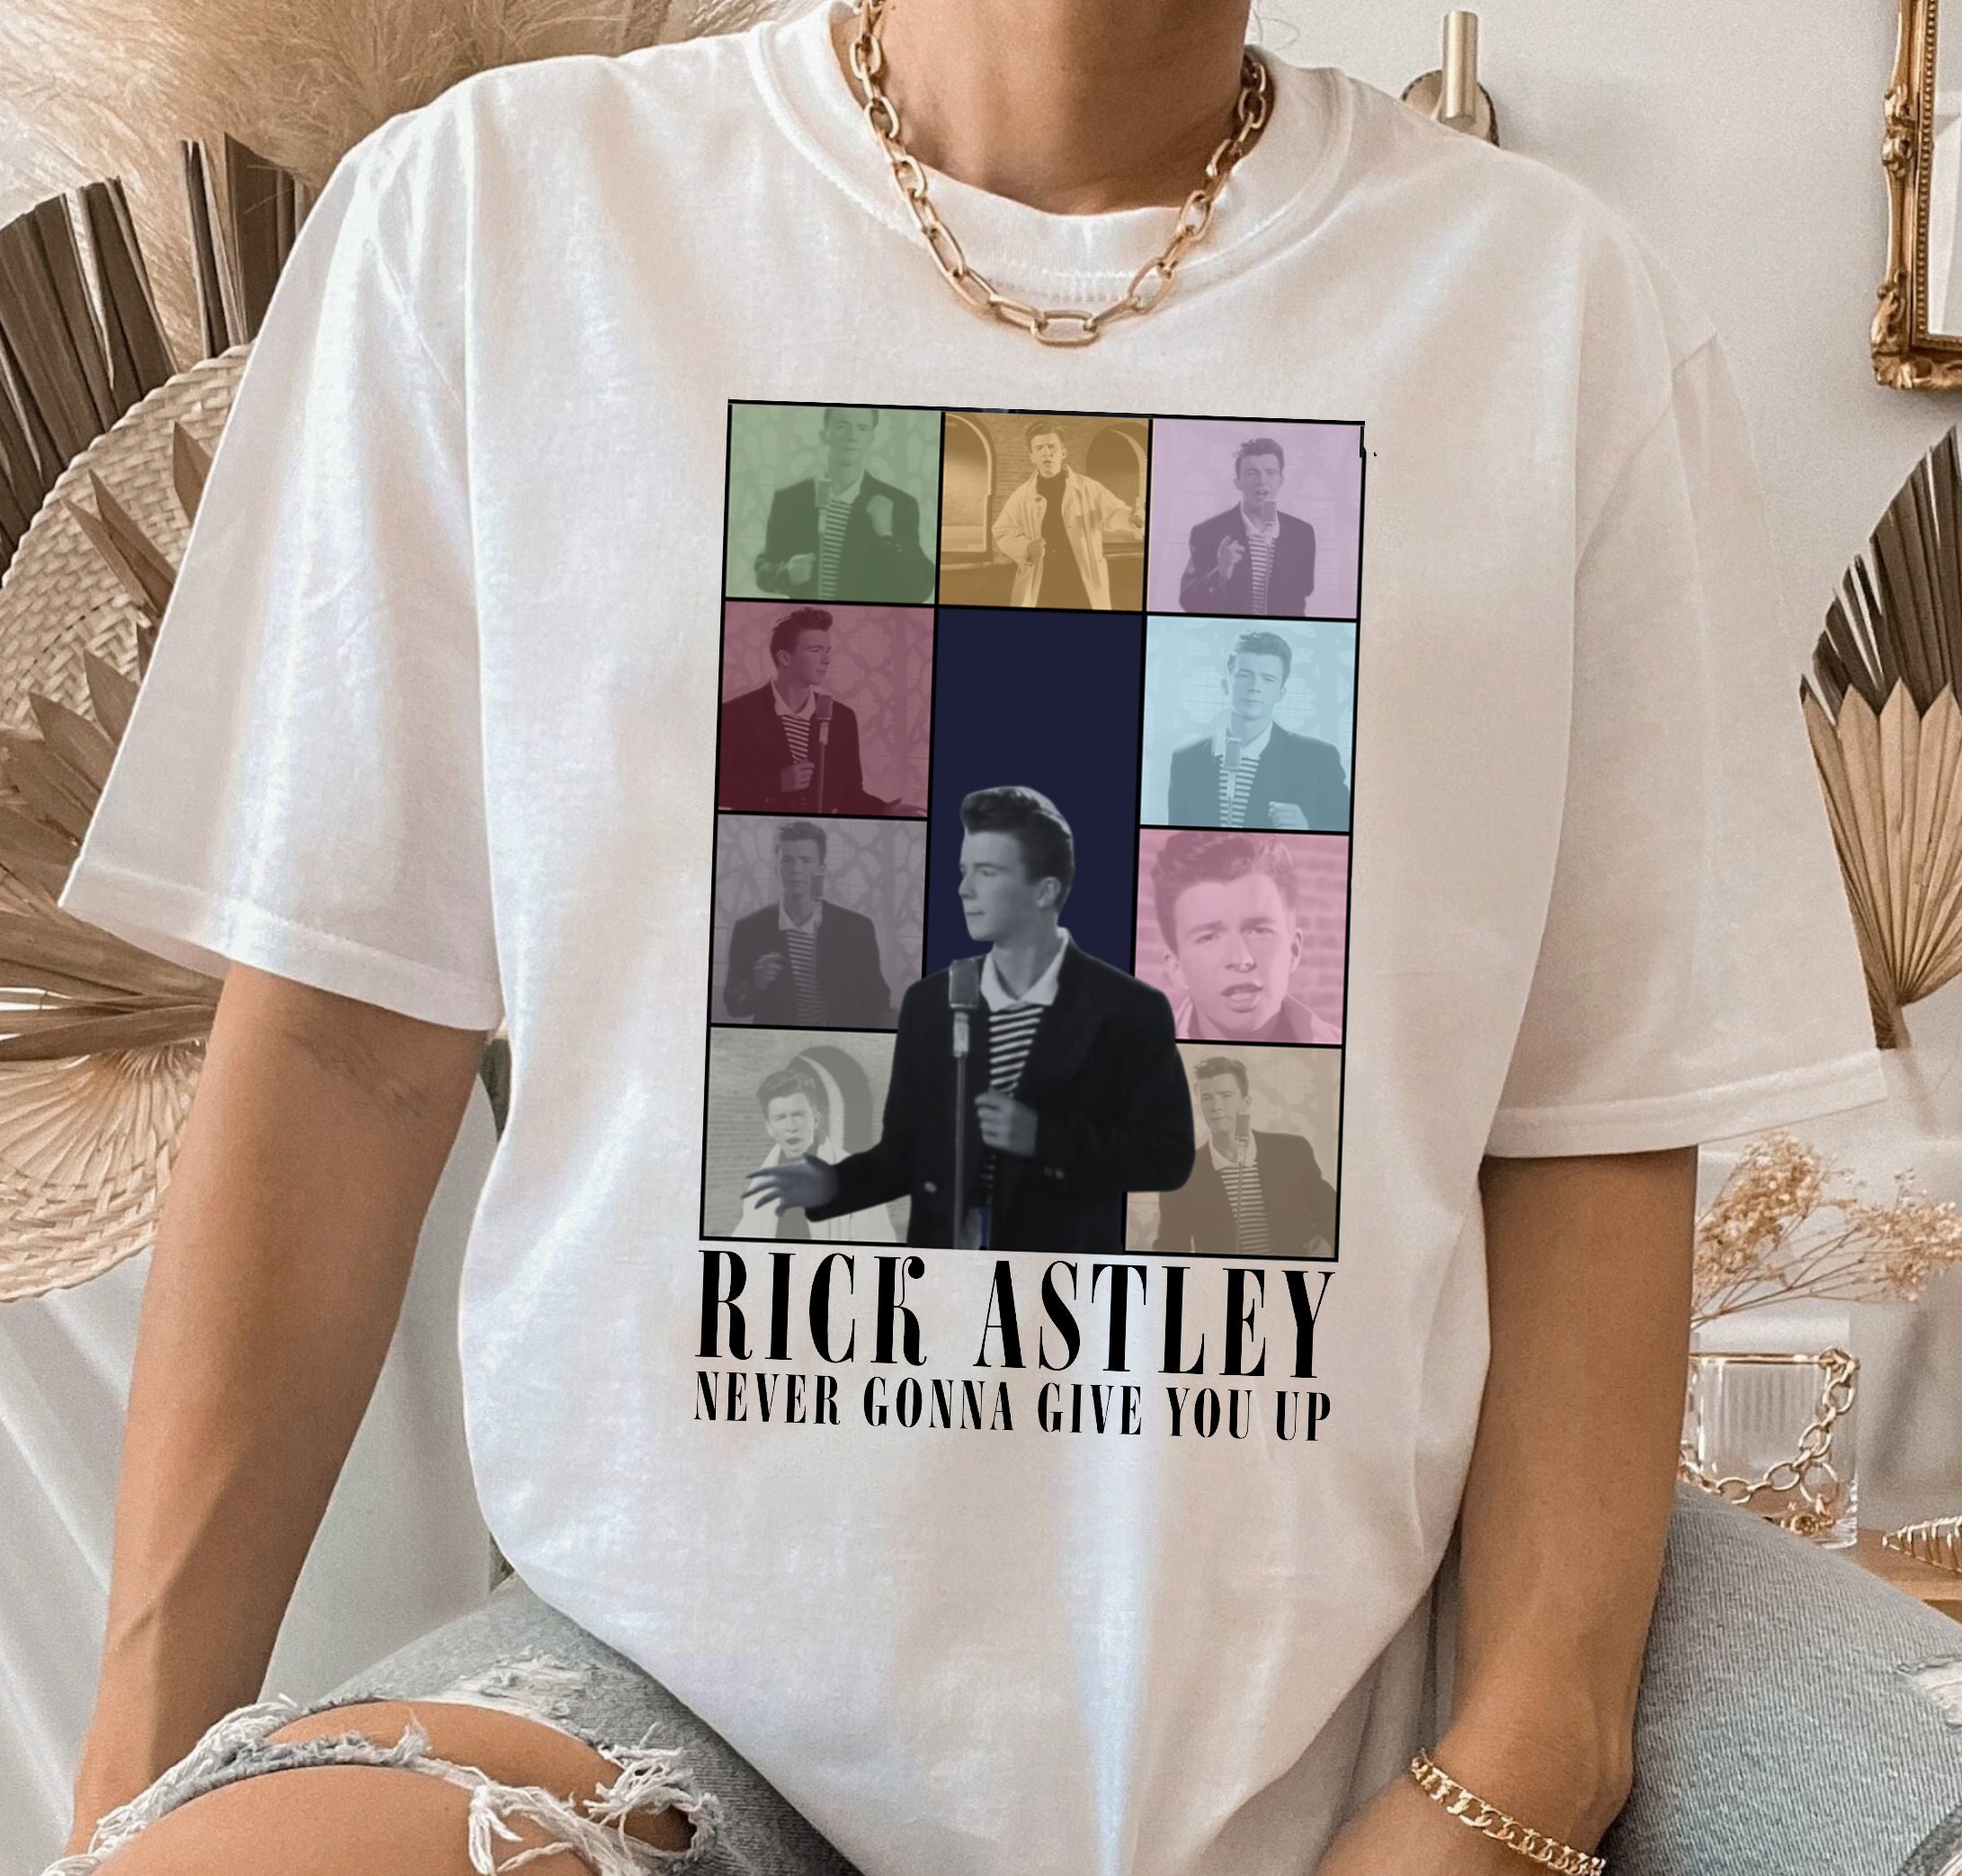 Rick Astley For Prime Minister - Womens T-Shirt - 80s 80's Rolled Song  Lyrics